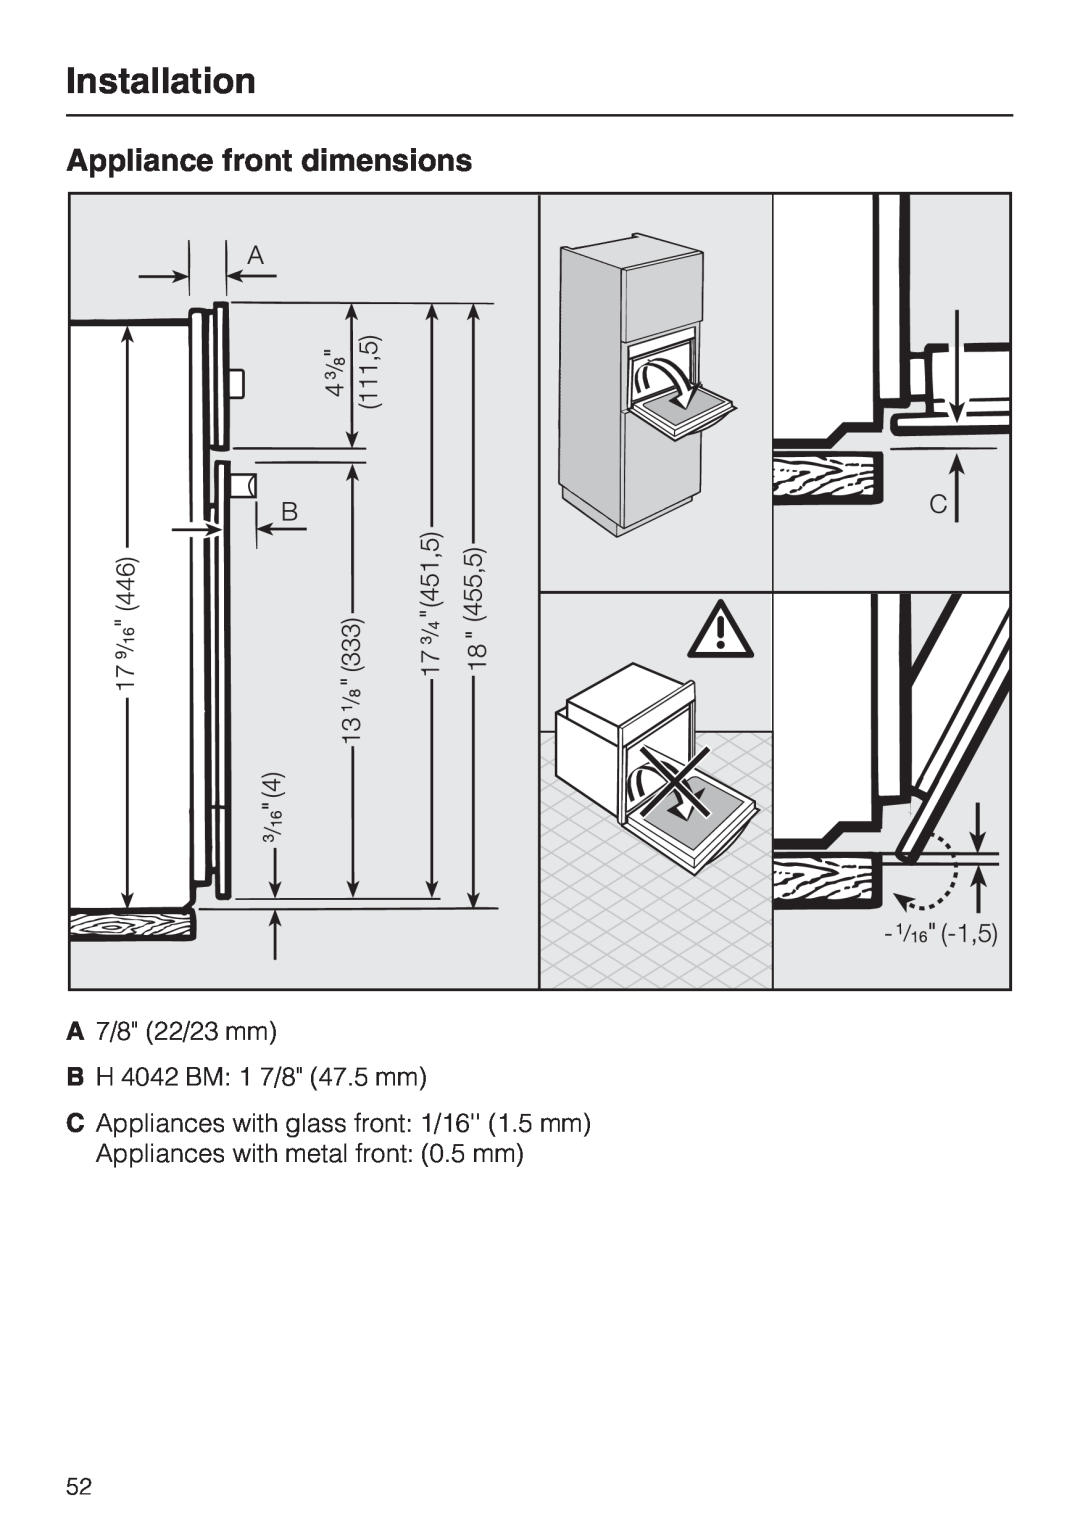 Miele installation instructions Appliance front dimensions, A 7/8 22/23 mm, B H 4042 BM 1 7/8 47.5 mm, Installation 